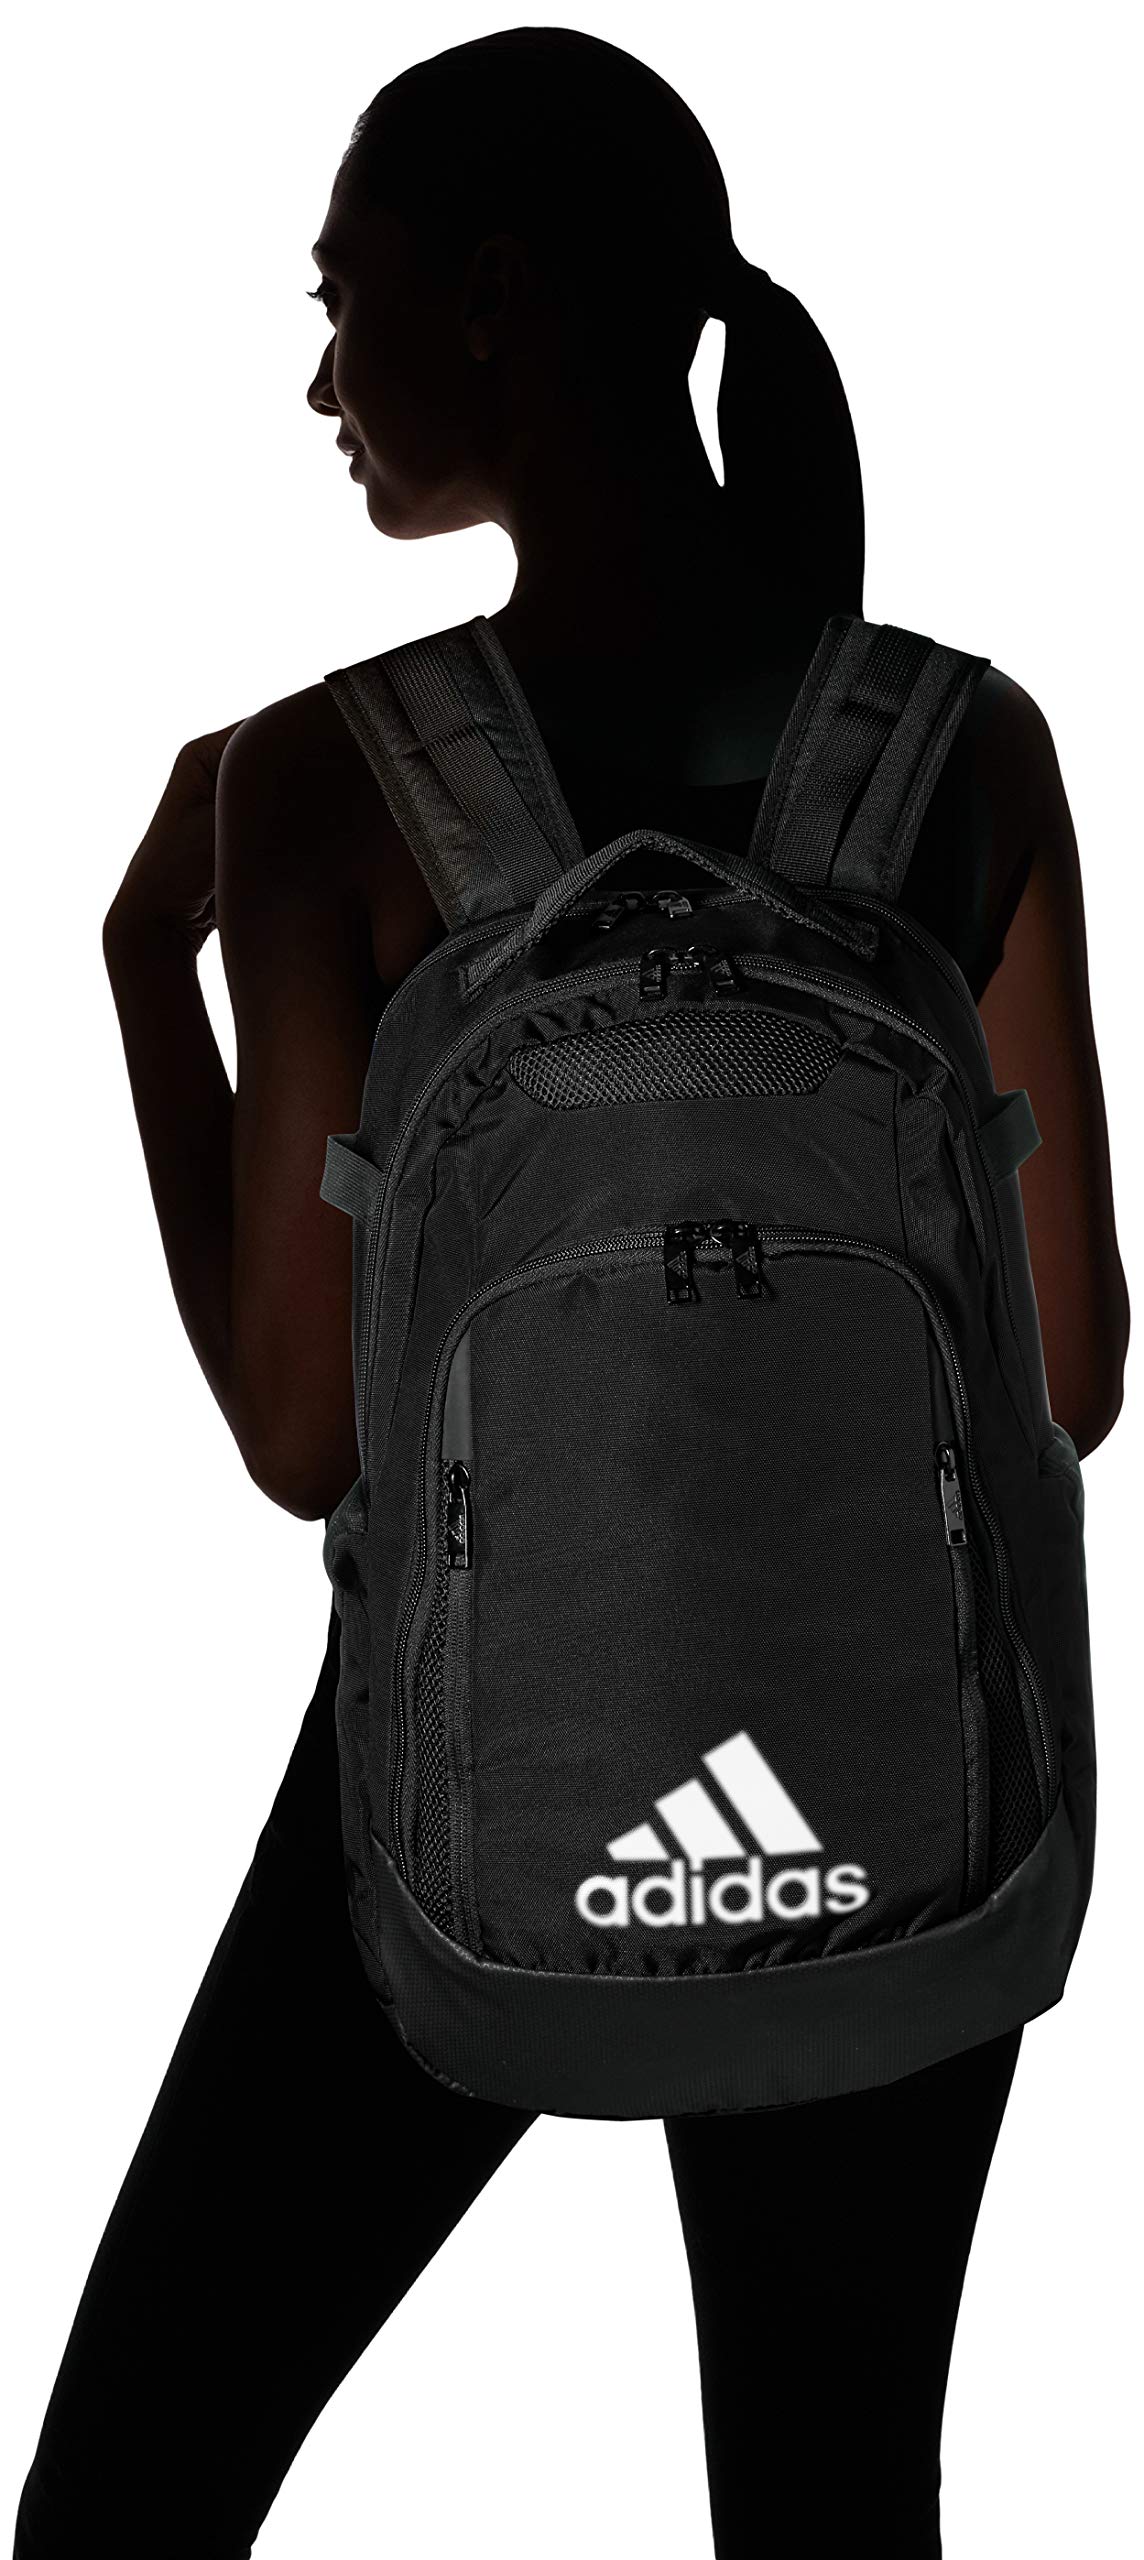 adidas 5-Star Team Backpack, Black, One Size